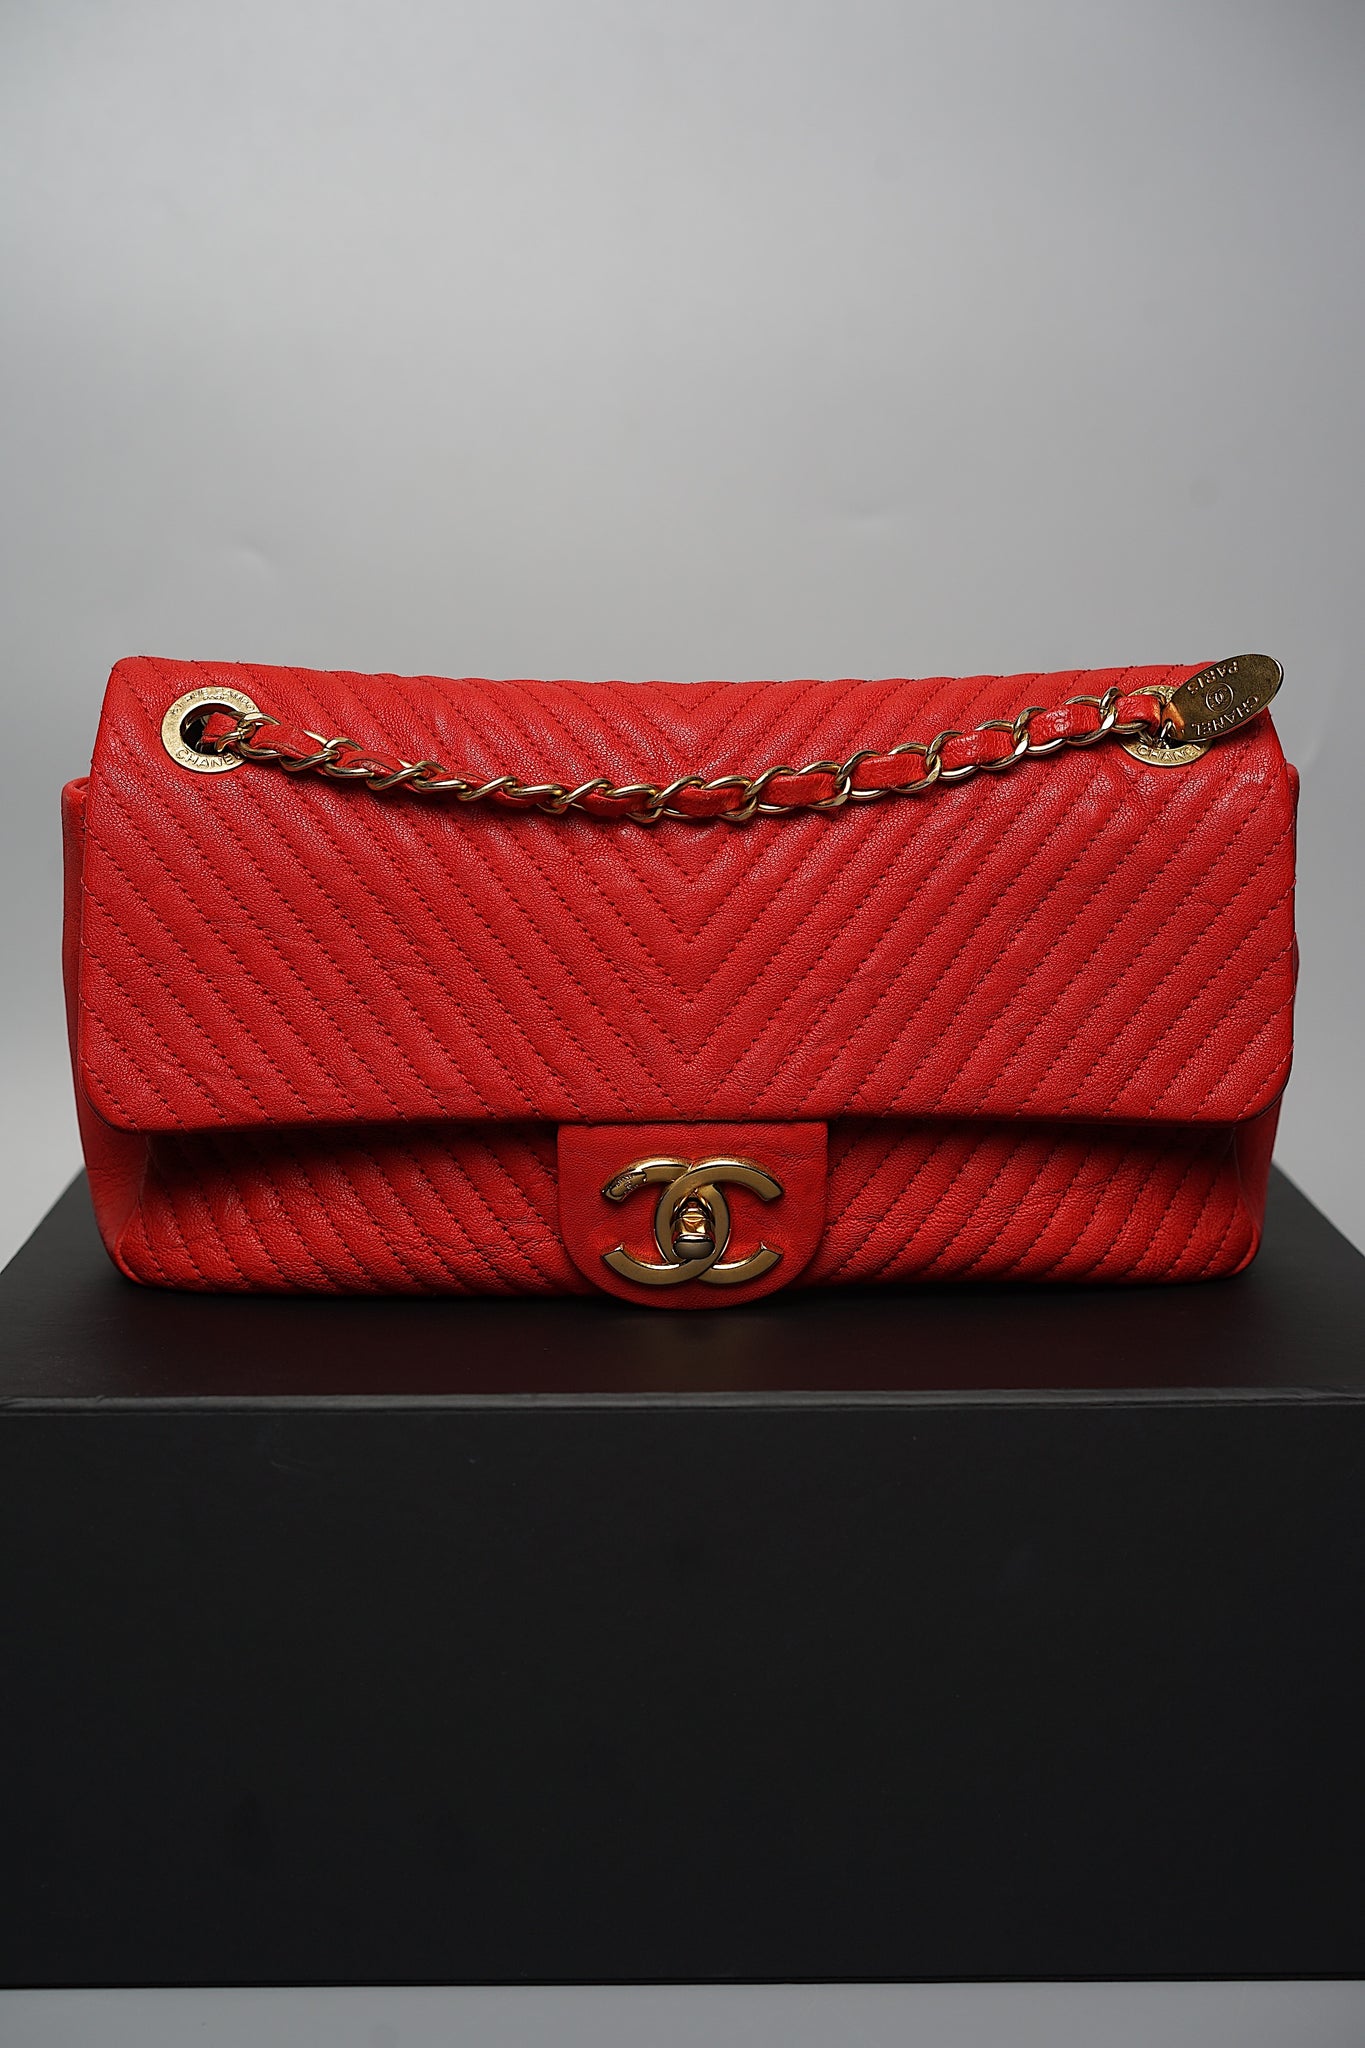 Chanel Flap Bag in Red Ghw